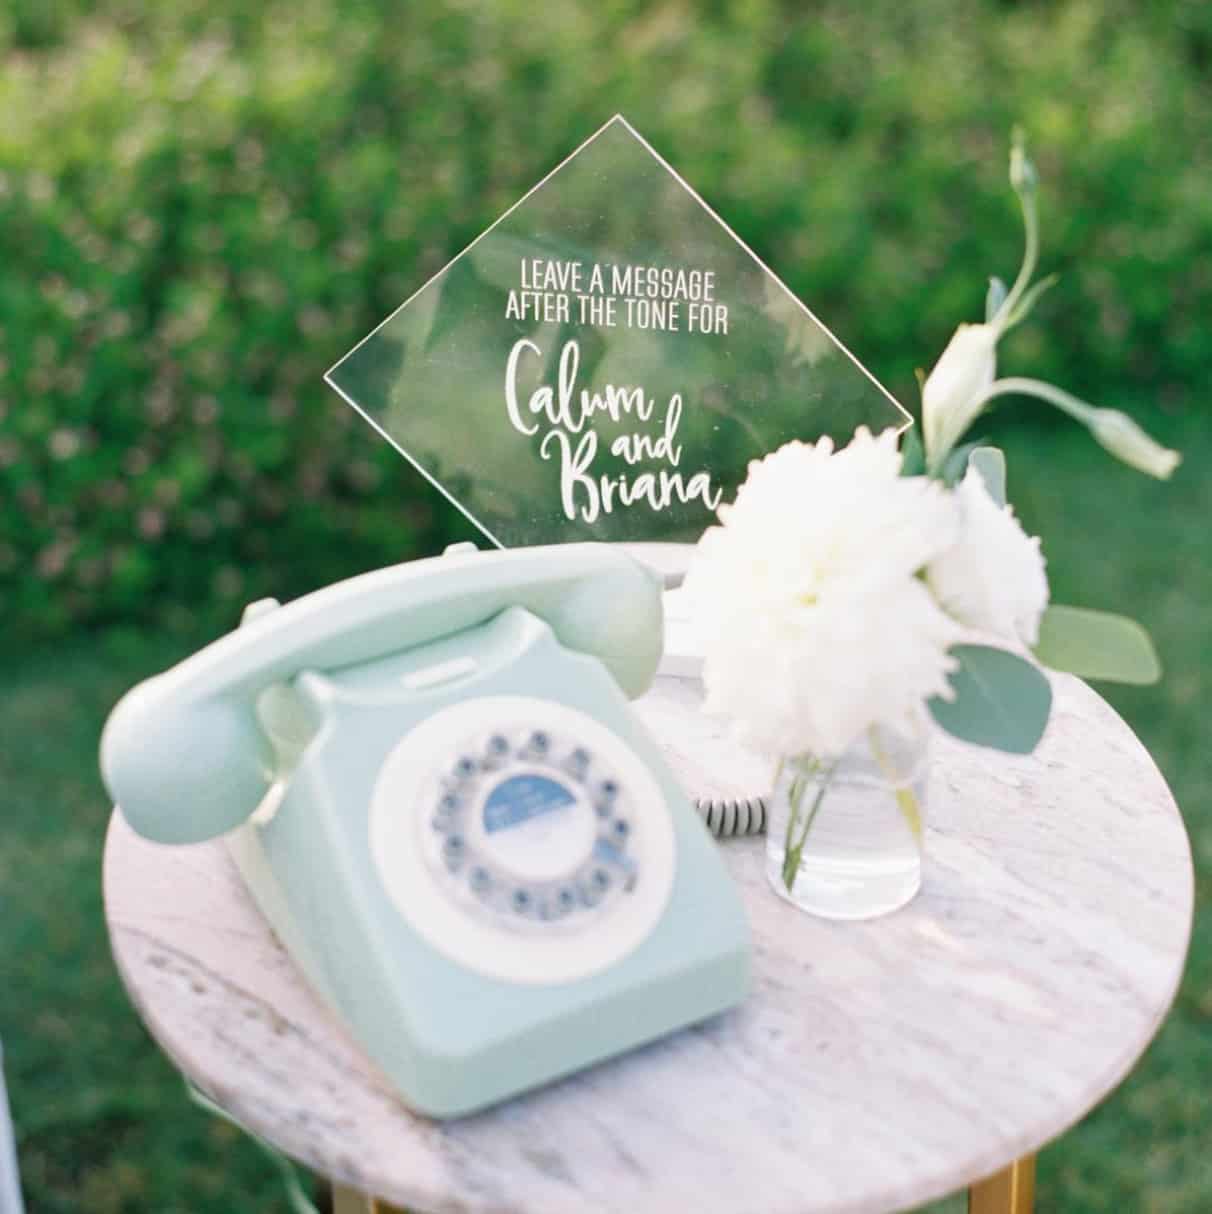 audio guest book phone on table for emotional voicemail keepsakes